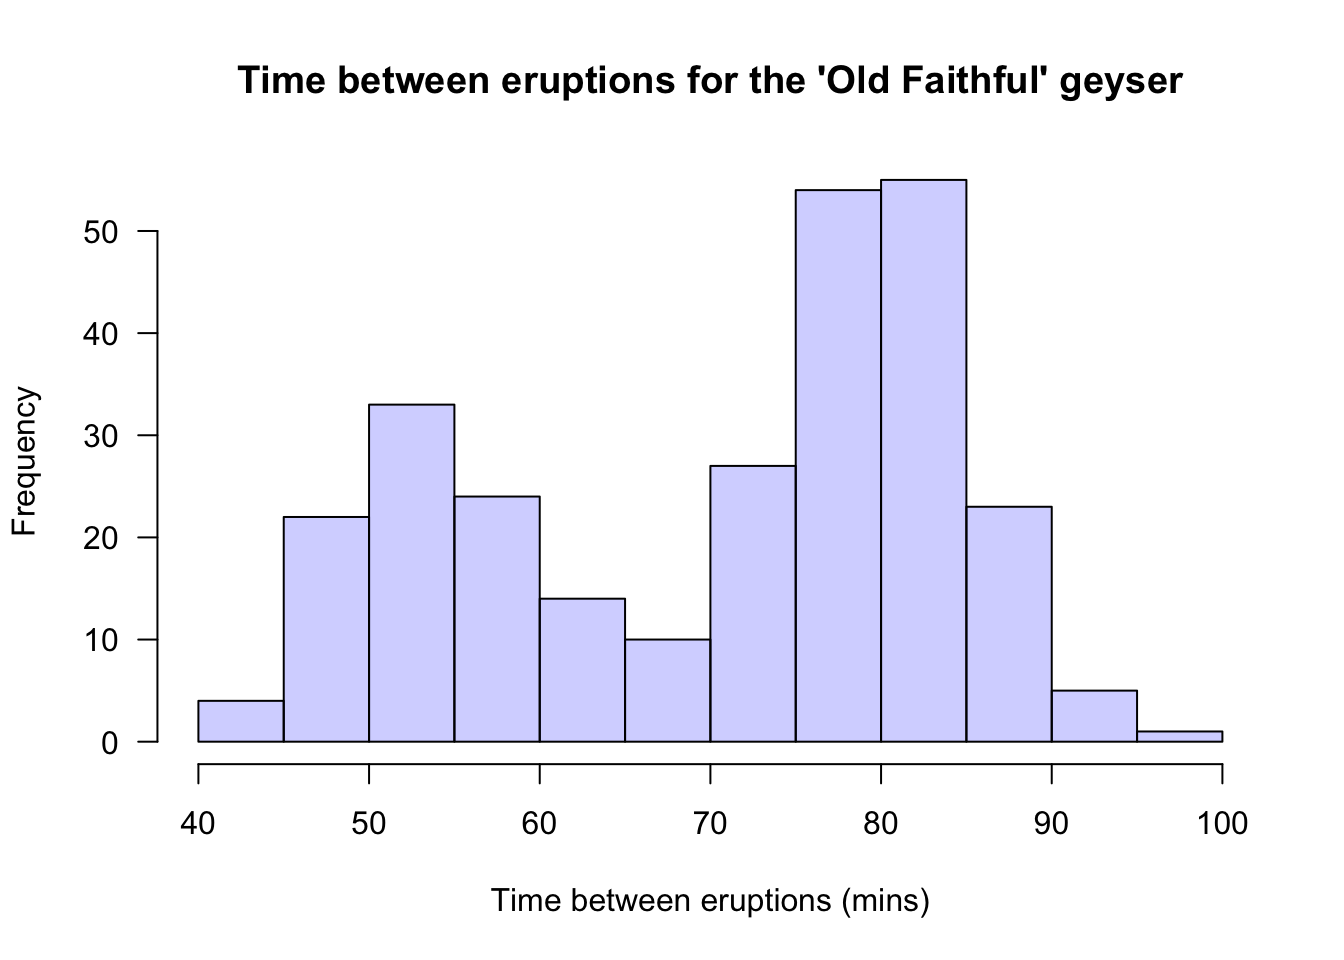 Histogram of the times between eruptions for the Old Faithful geyser